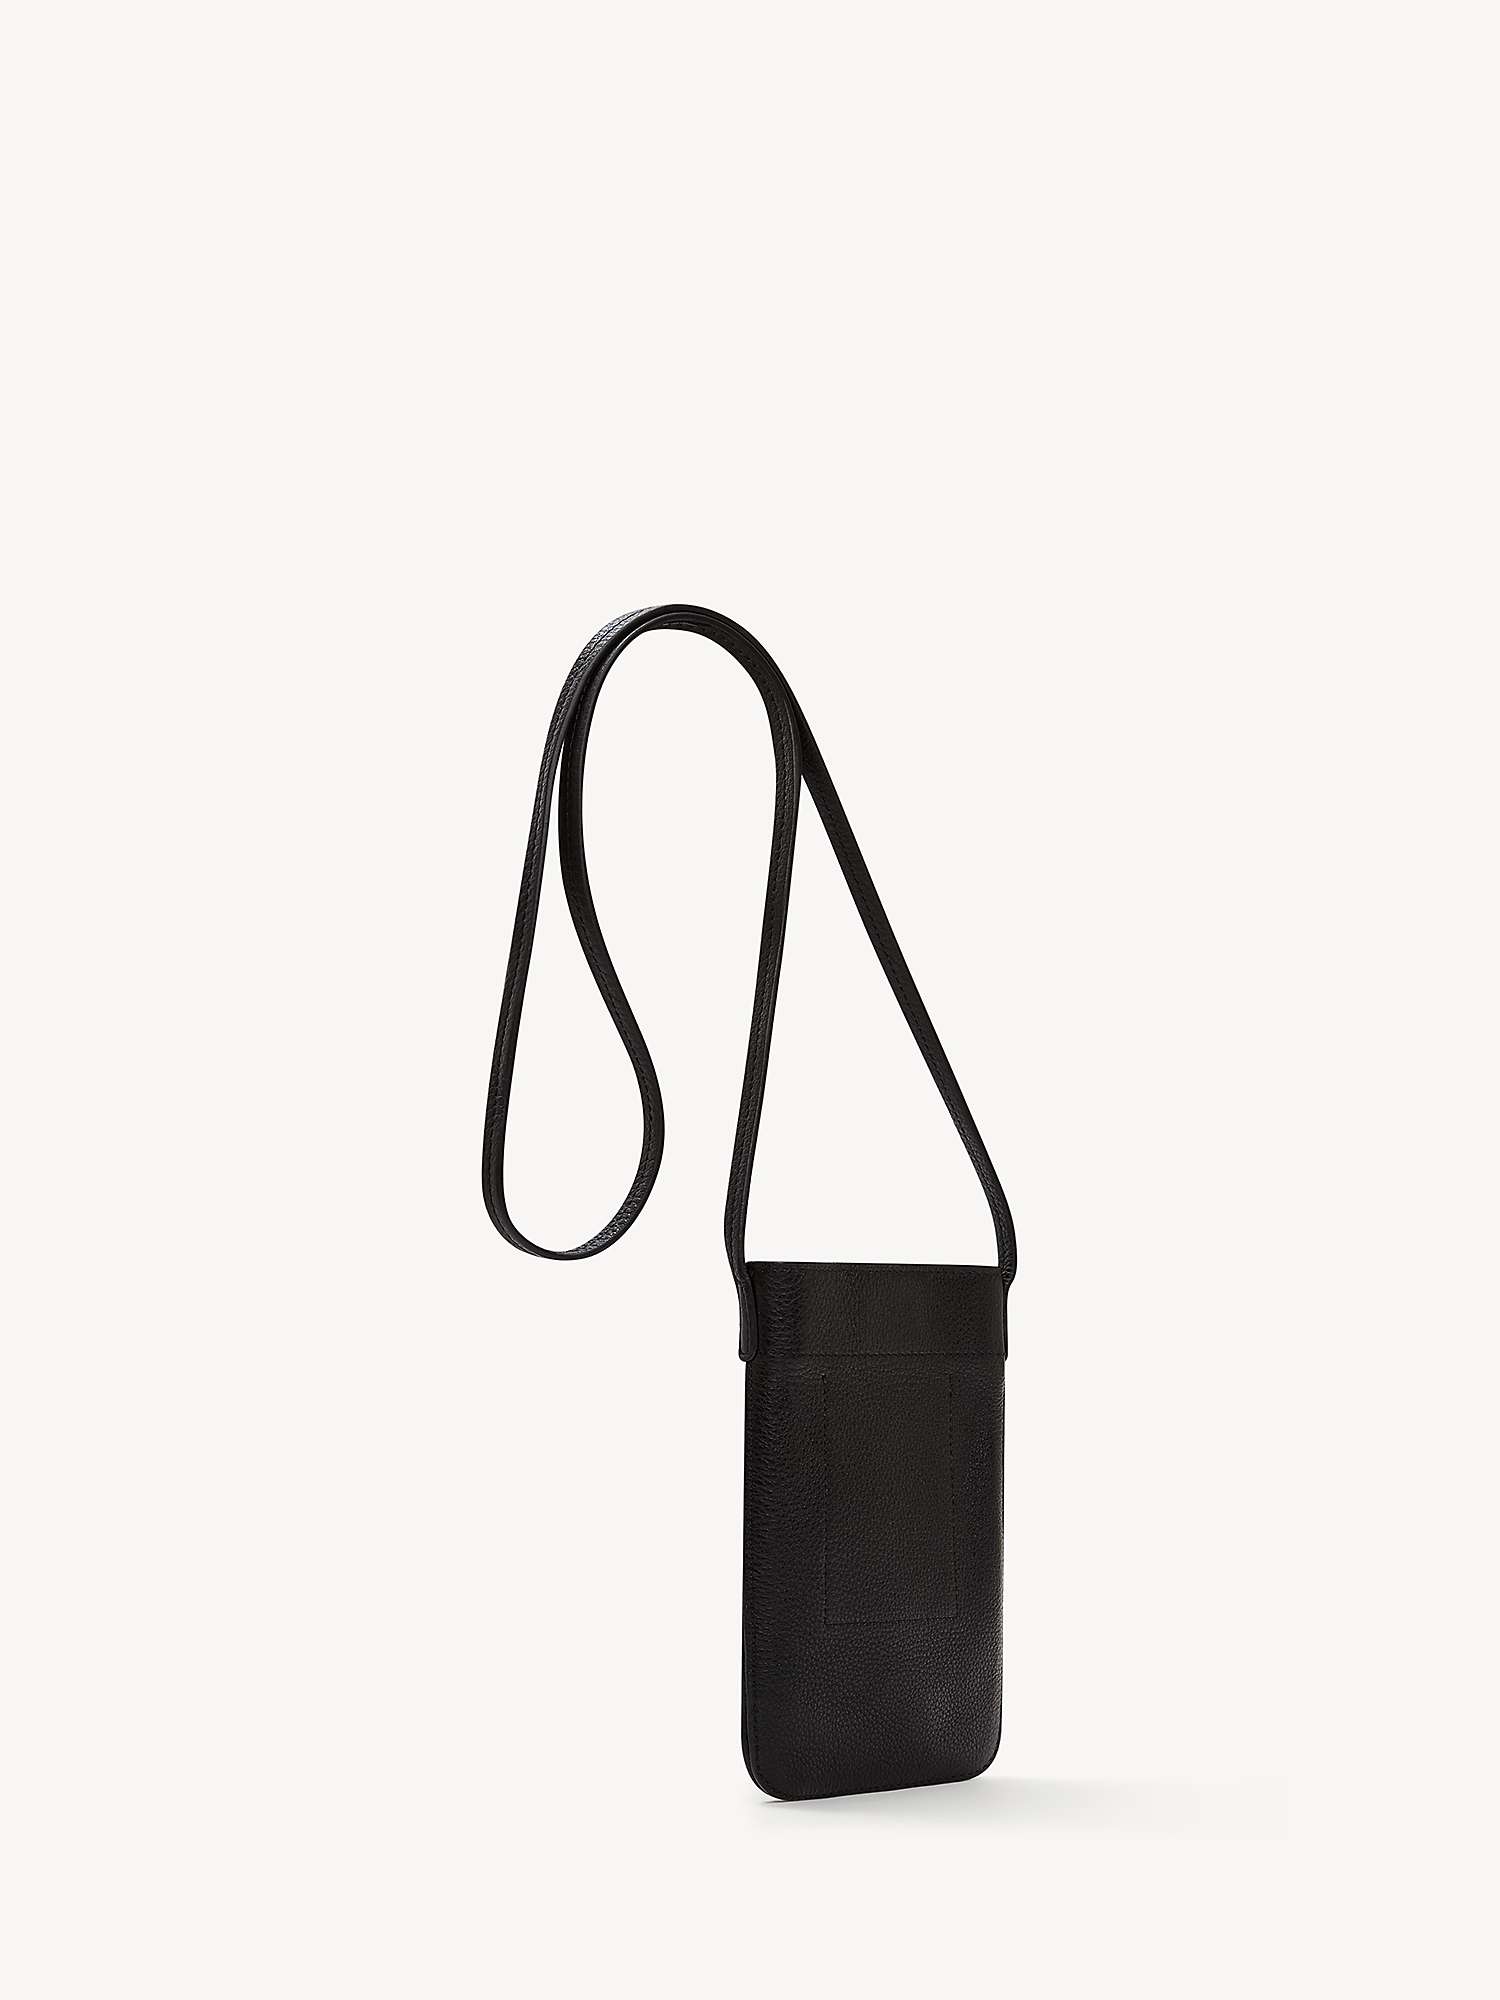 Buy Gerard Darel Ladyphone Small Grained Leather Bag Online at johnlewis.com